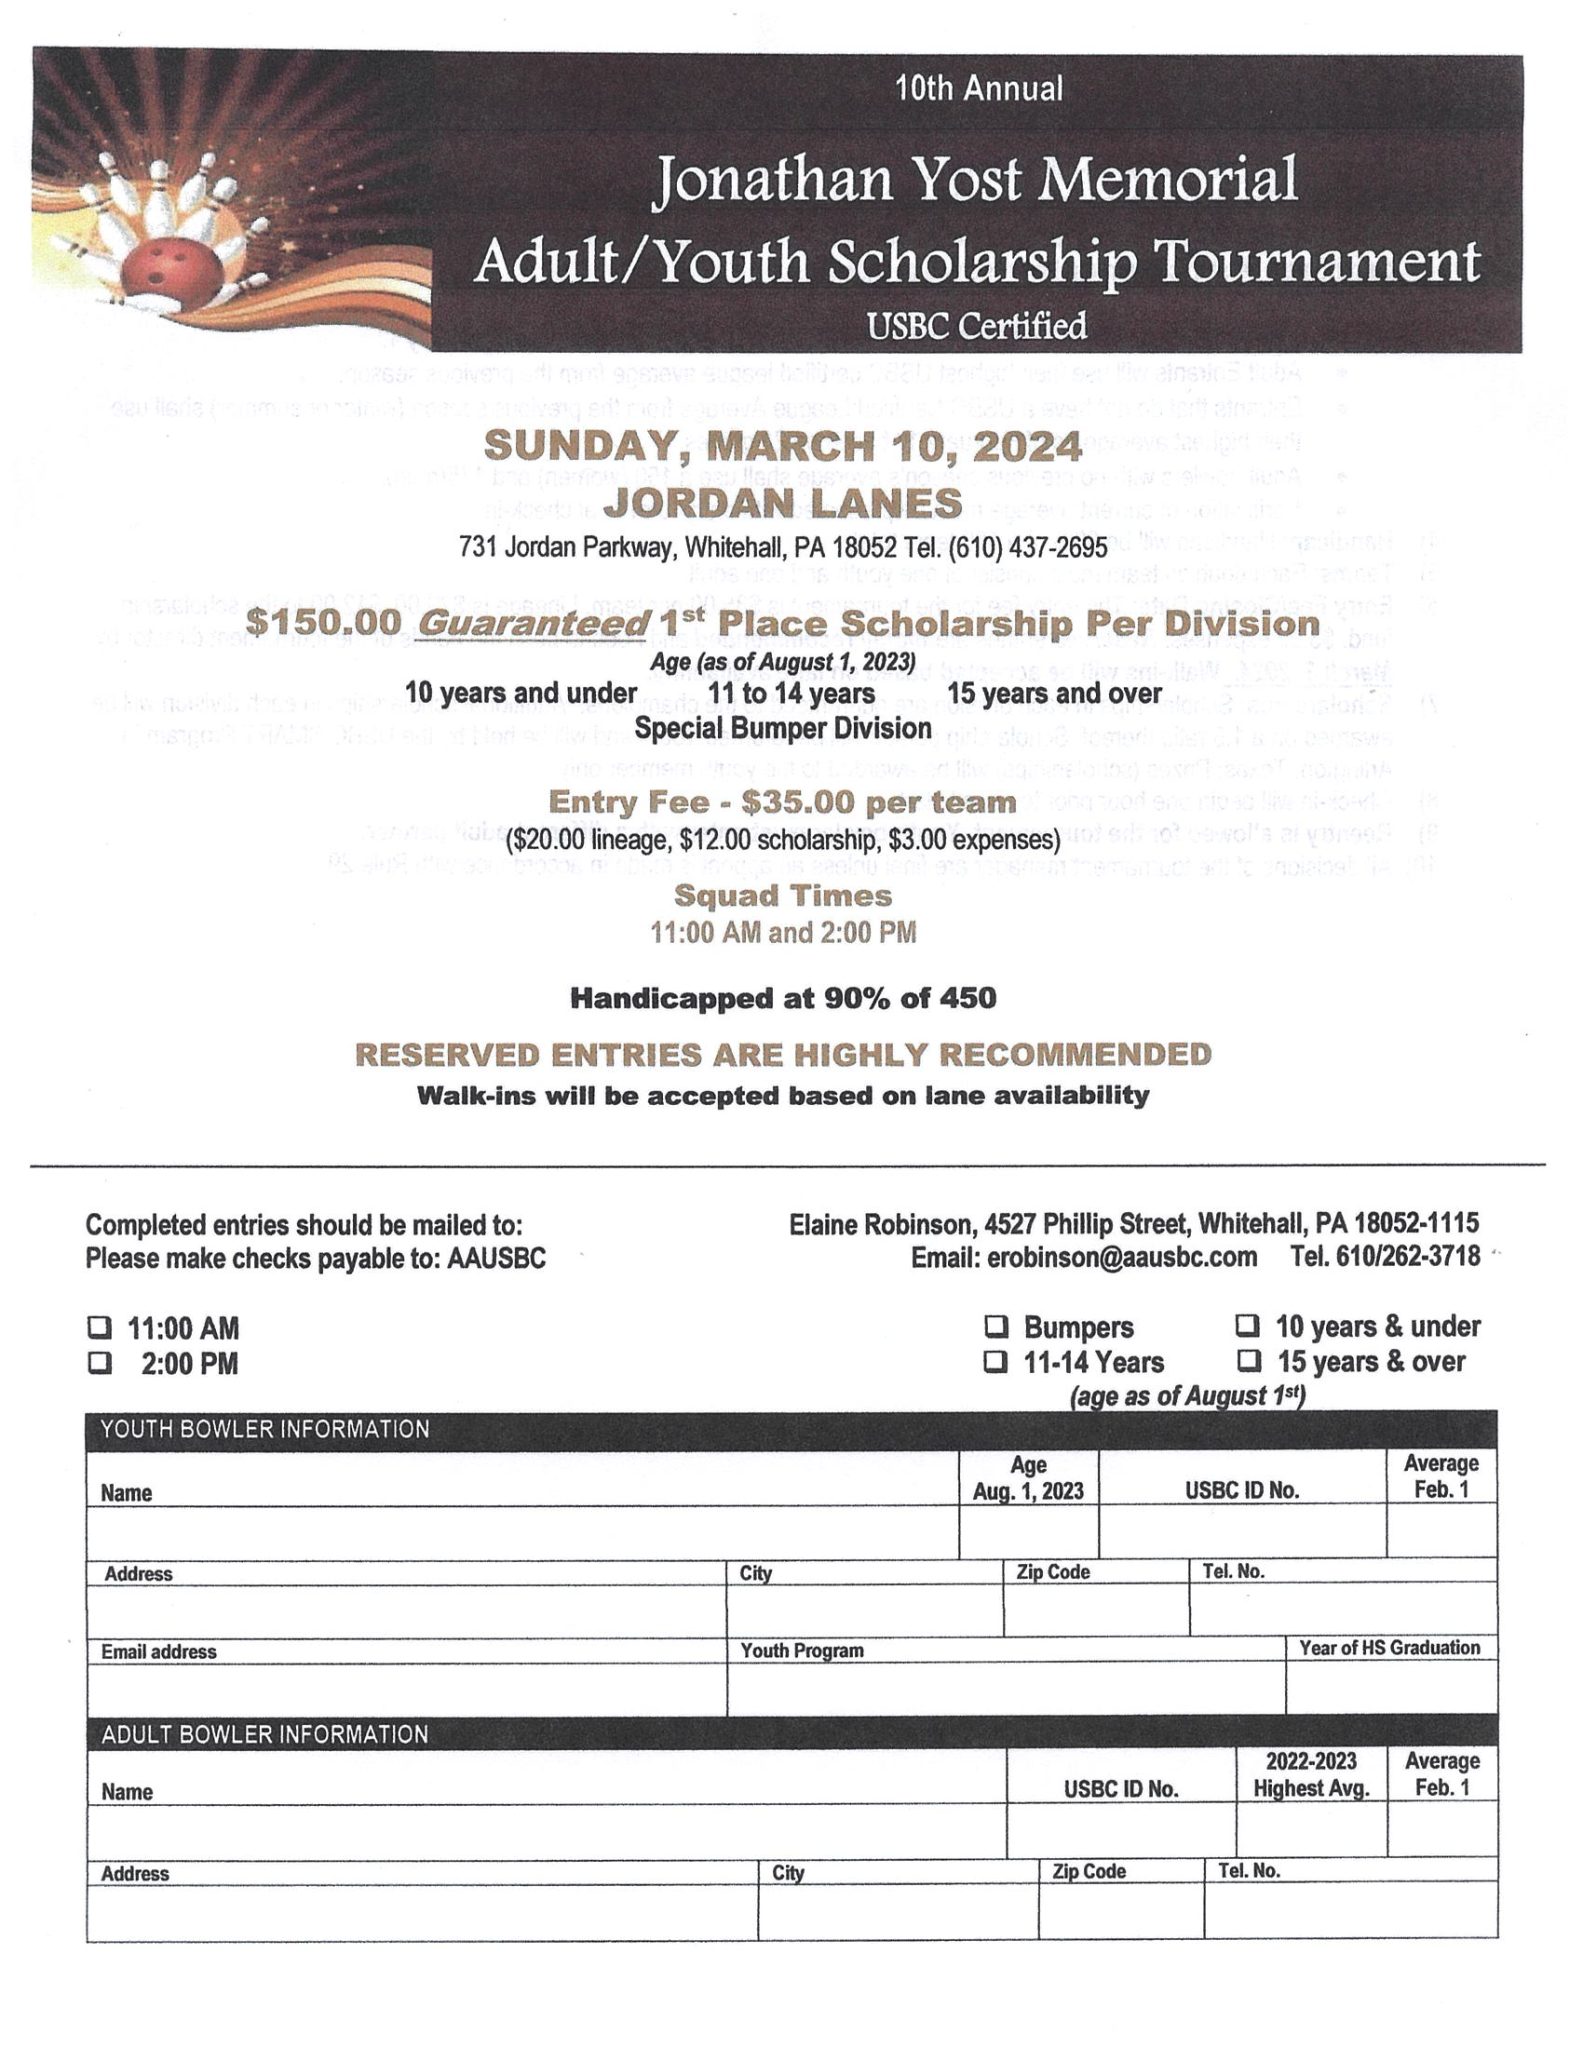 10th Annual Jonathan Yost Memorial Adult / Youth Scholarship Tournament 4